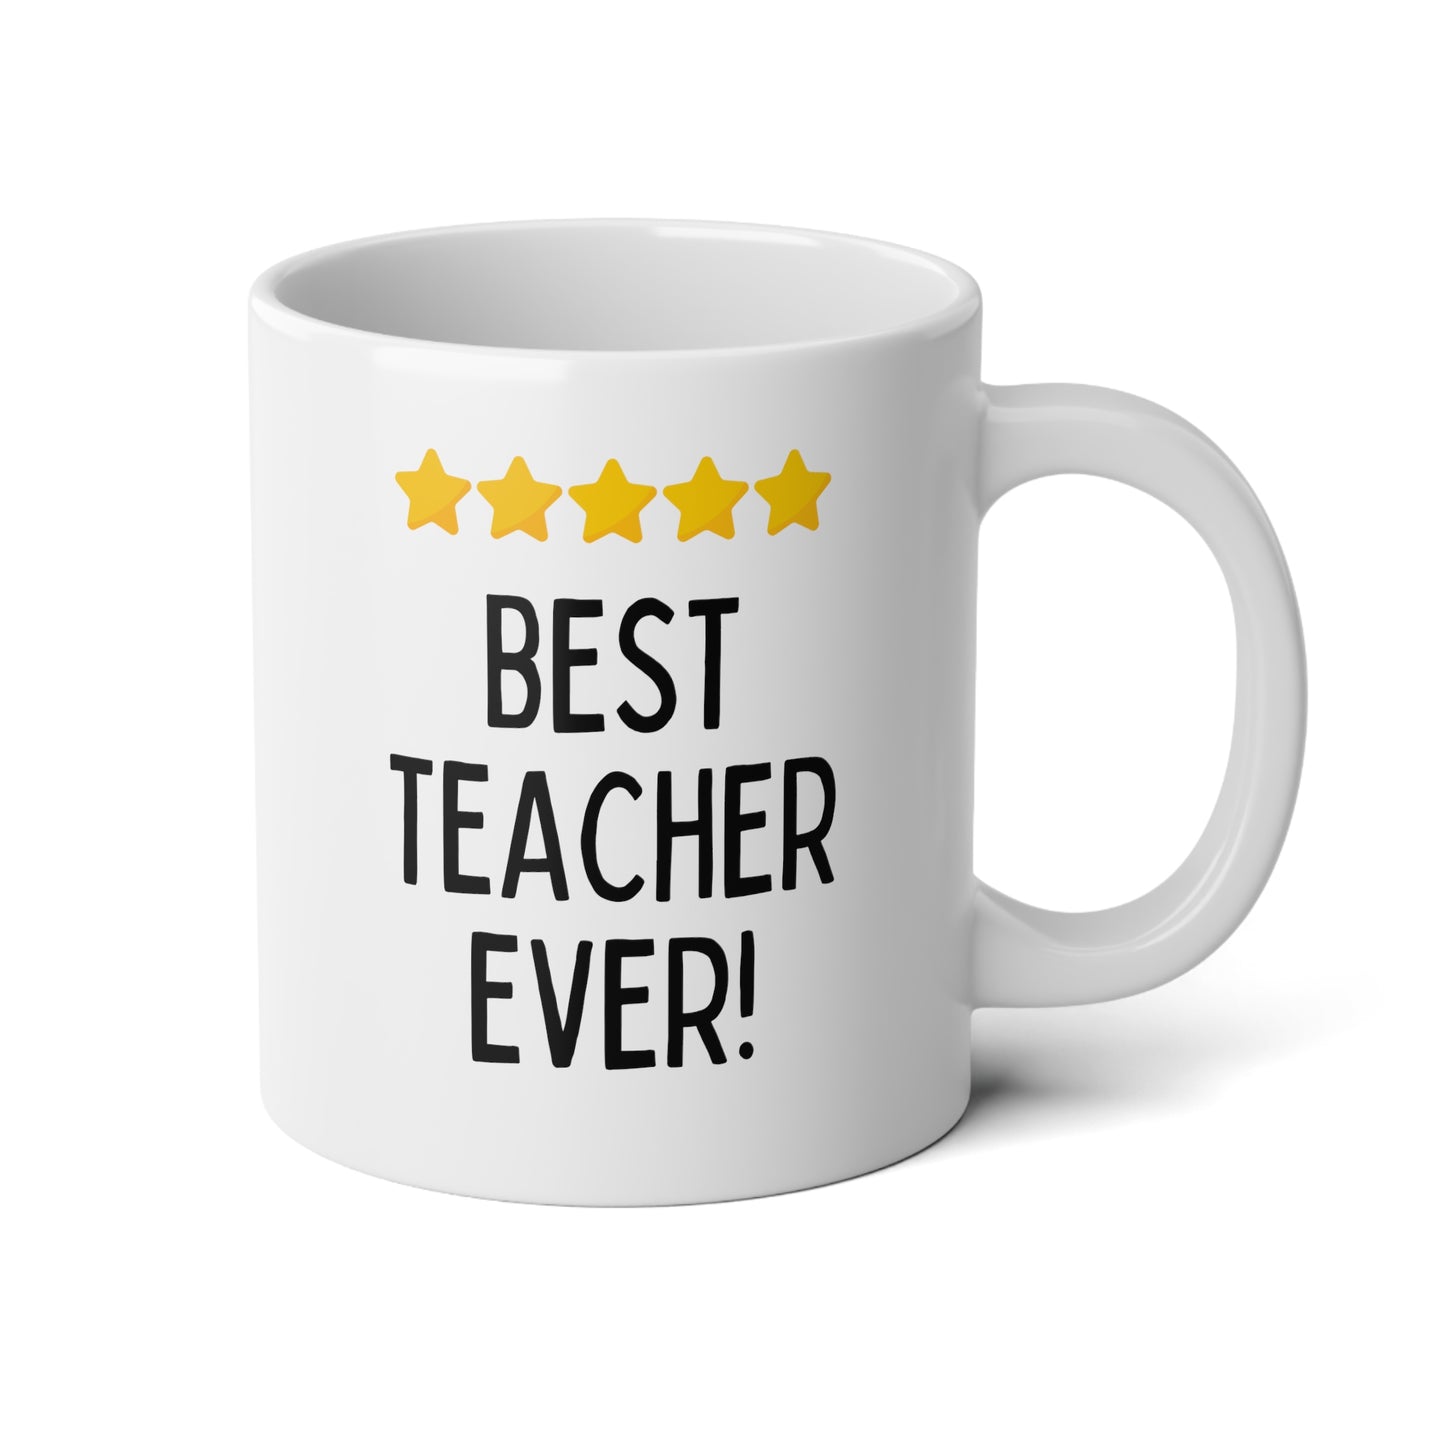 Best Teacher Ever 20oz white funny large coffee mug gift for educator teaching assistant end of the year present professor tutor five stars wavey wares wavywares wavy wares